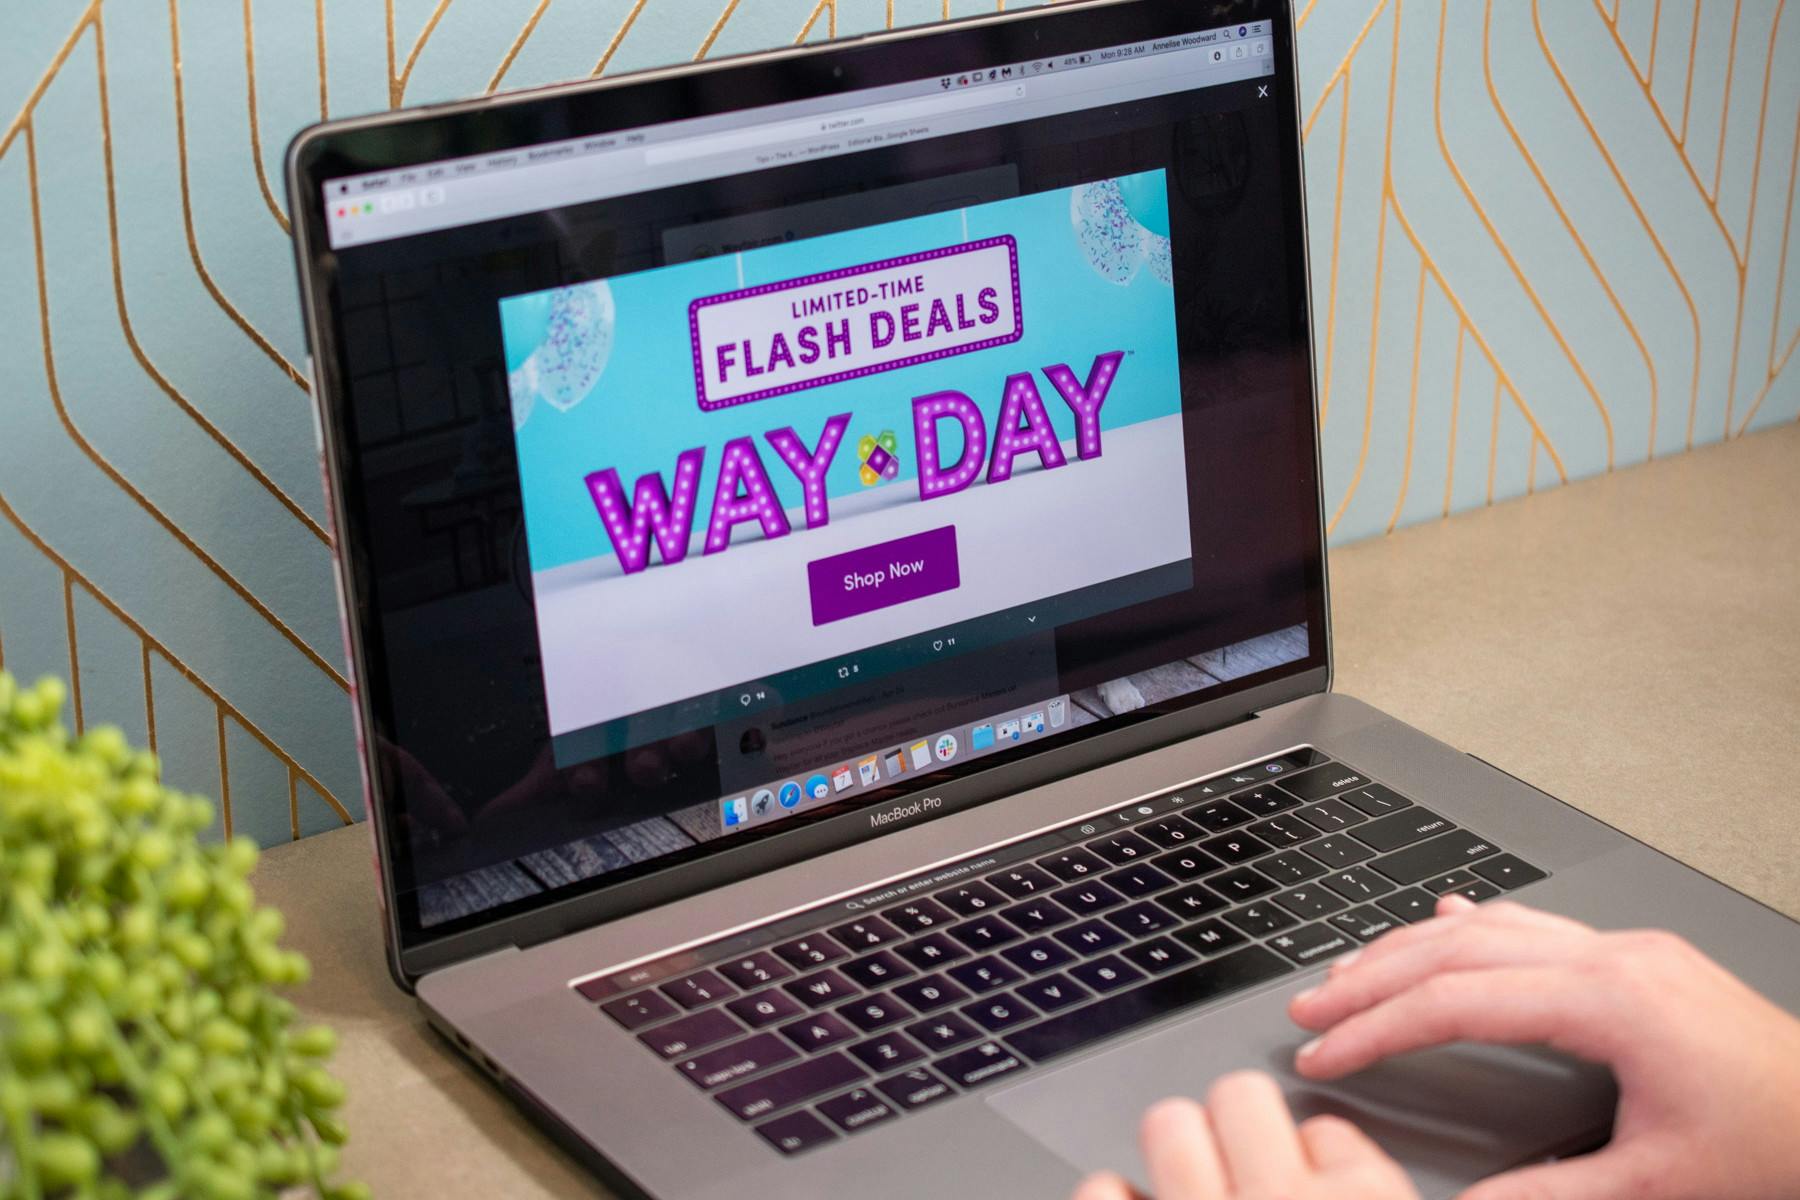 10% off Wayfair coupon code for first time shoppers! : r/wayfair